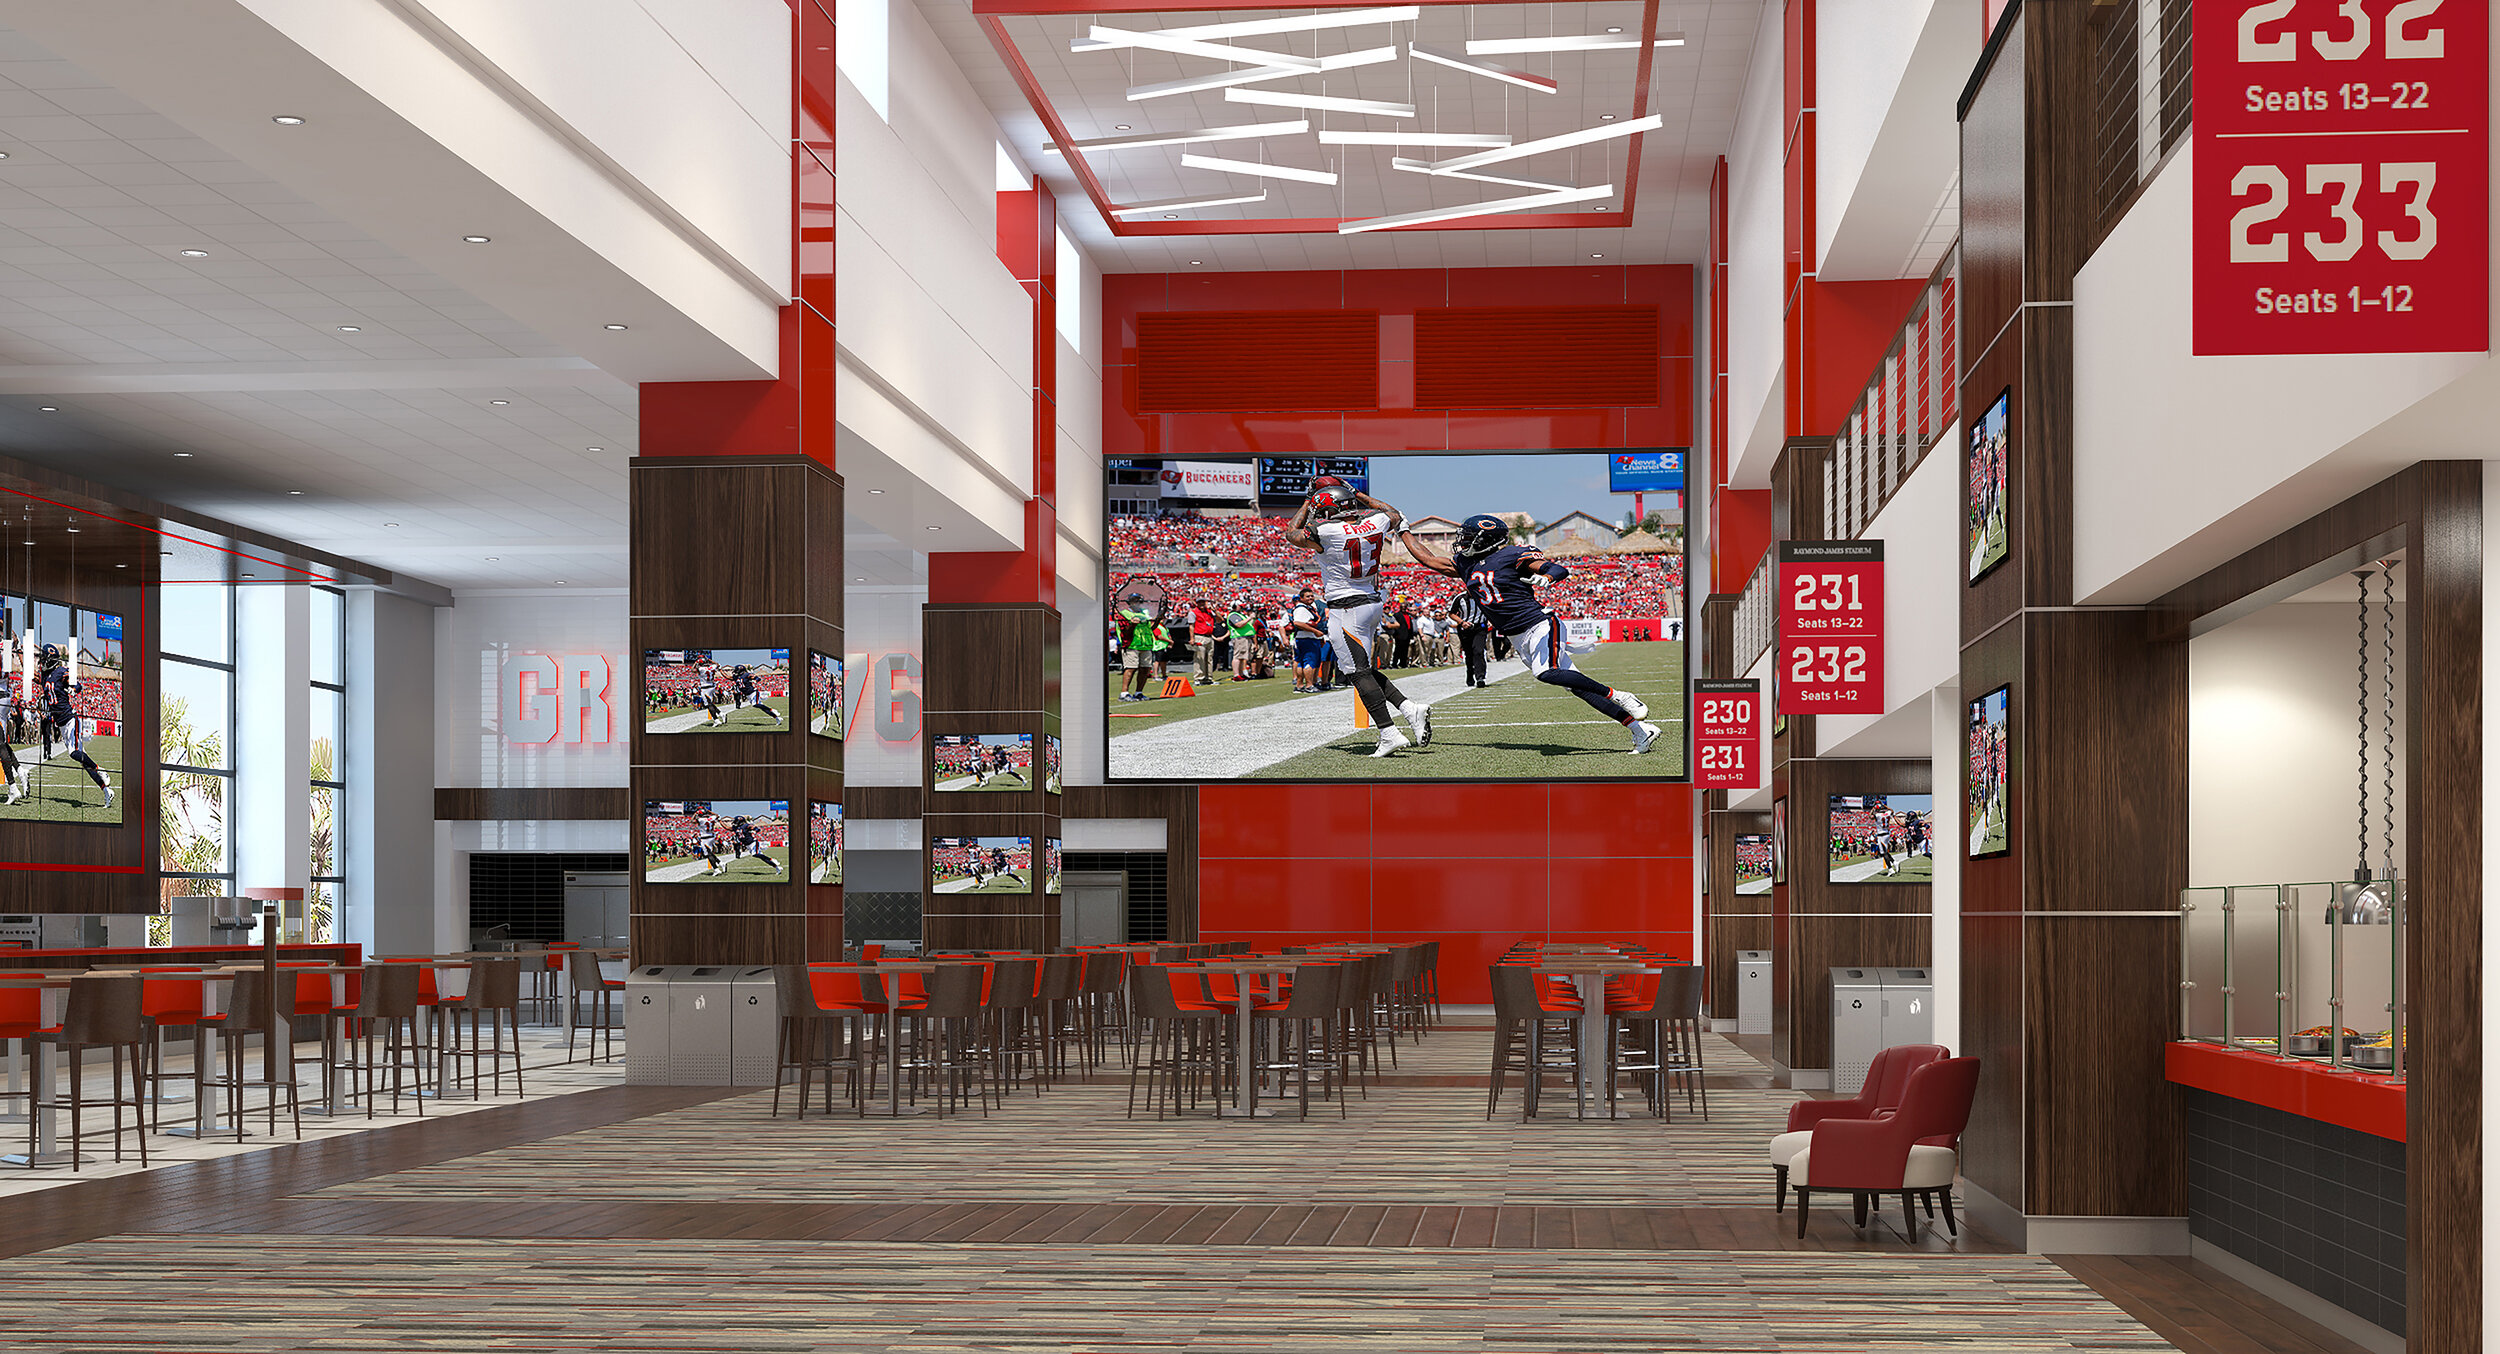 A large screen TV is seen in the interior of Bar No 76 in East Stadium Club 